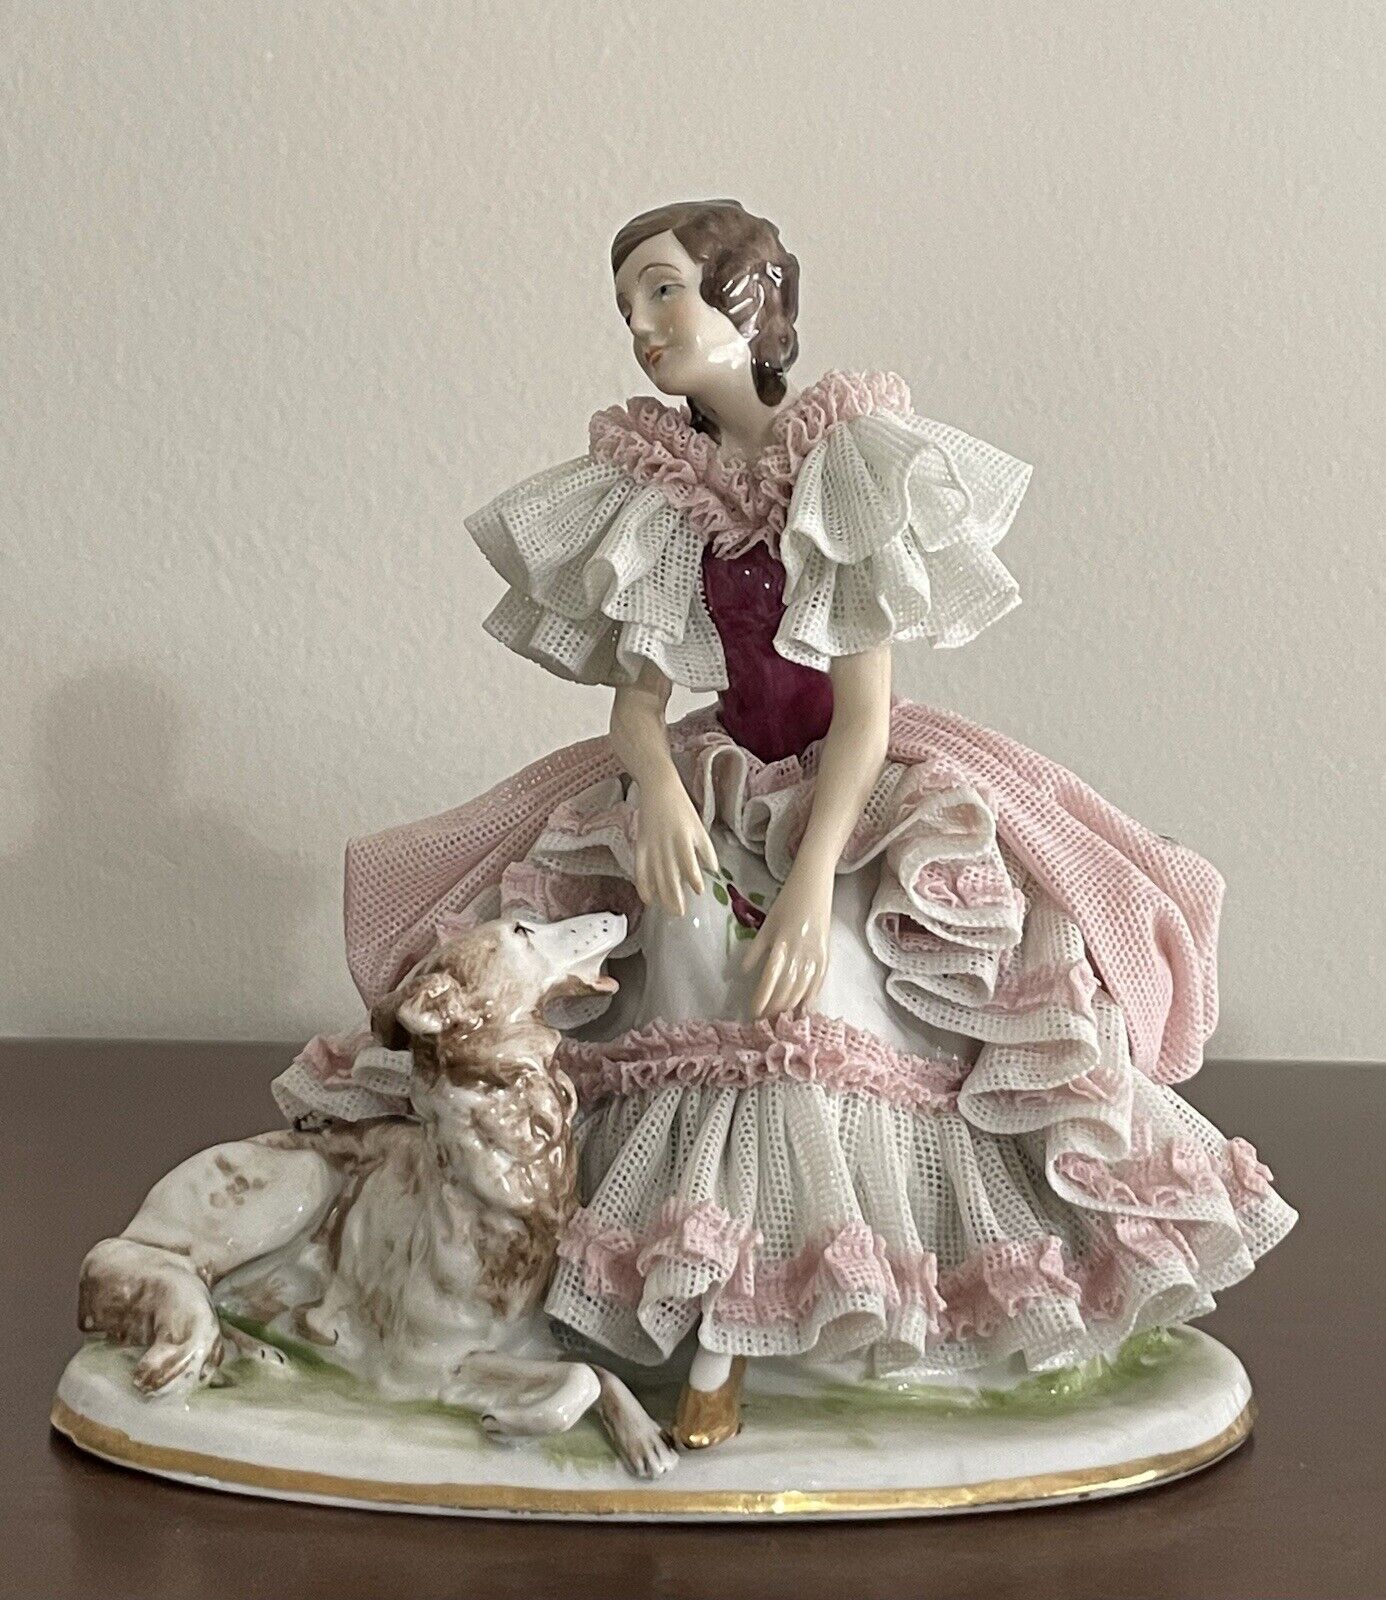 Dresden Lace Figurine - Lady with Borzoi Dog - German Porcelain